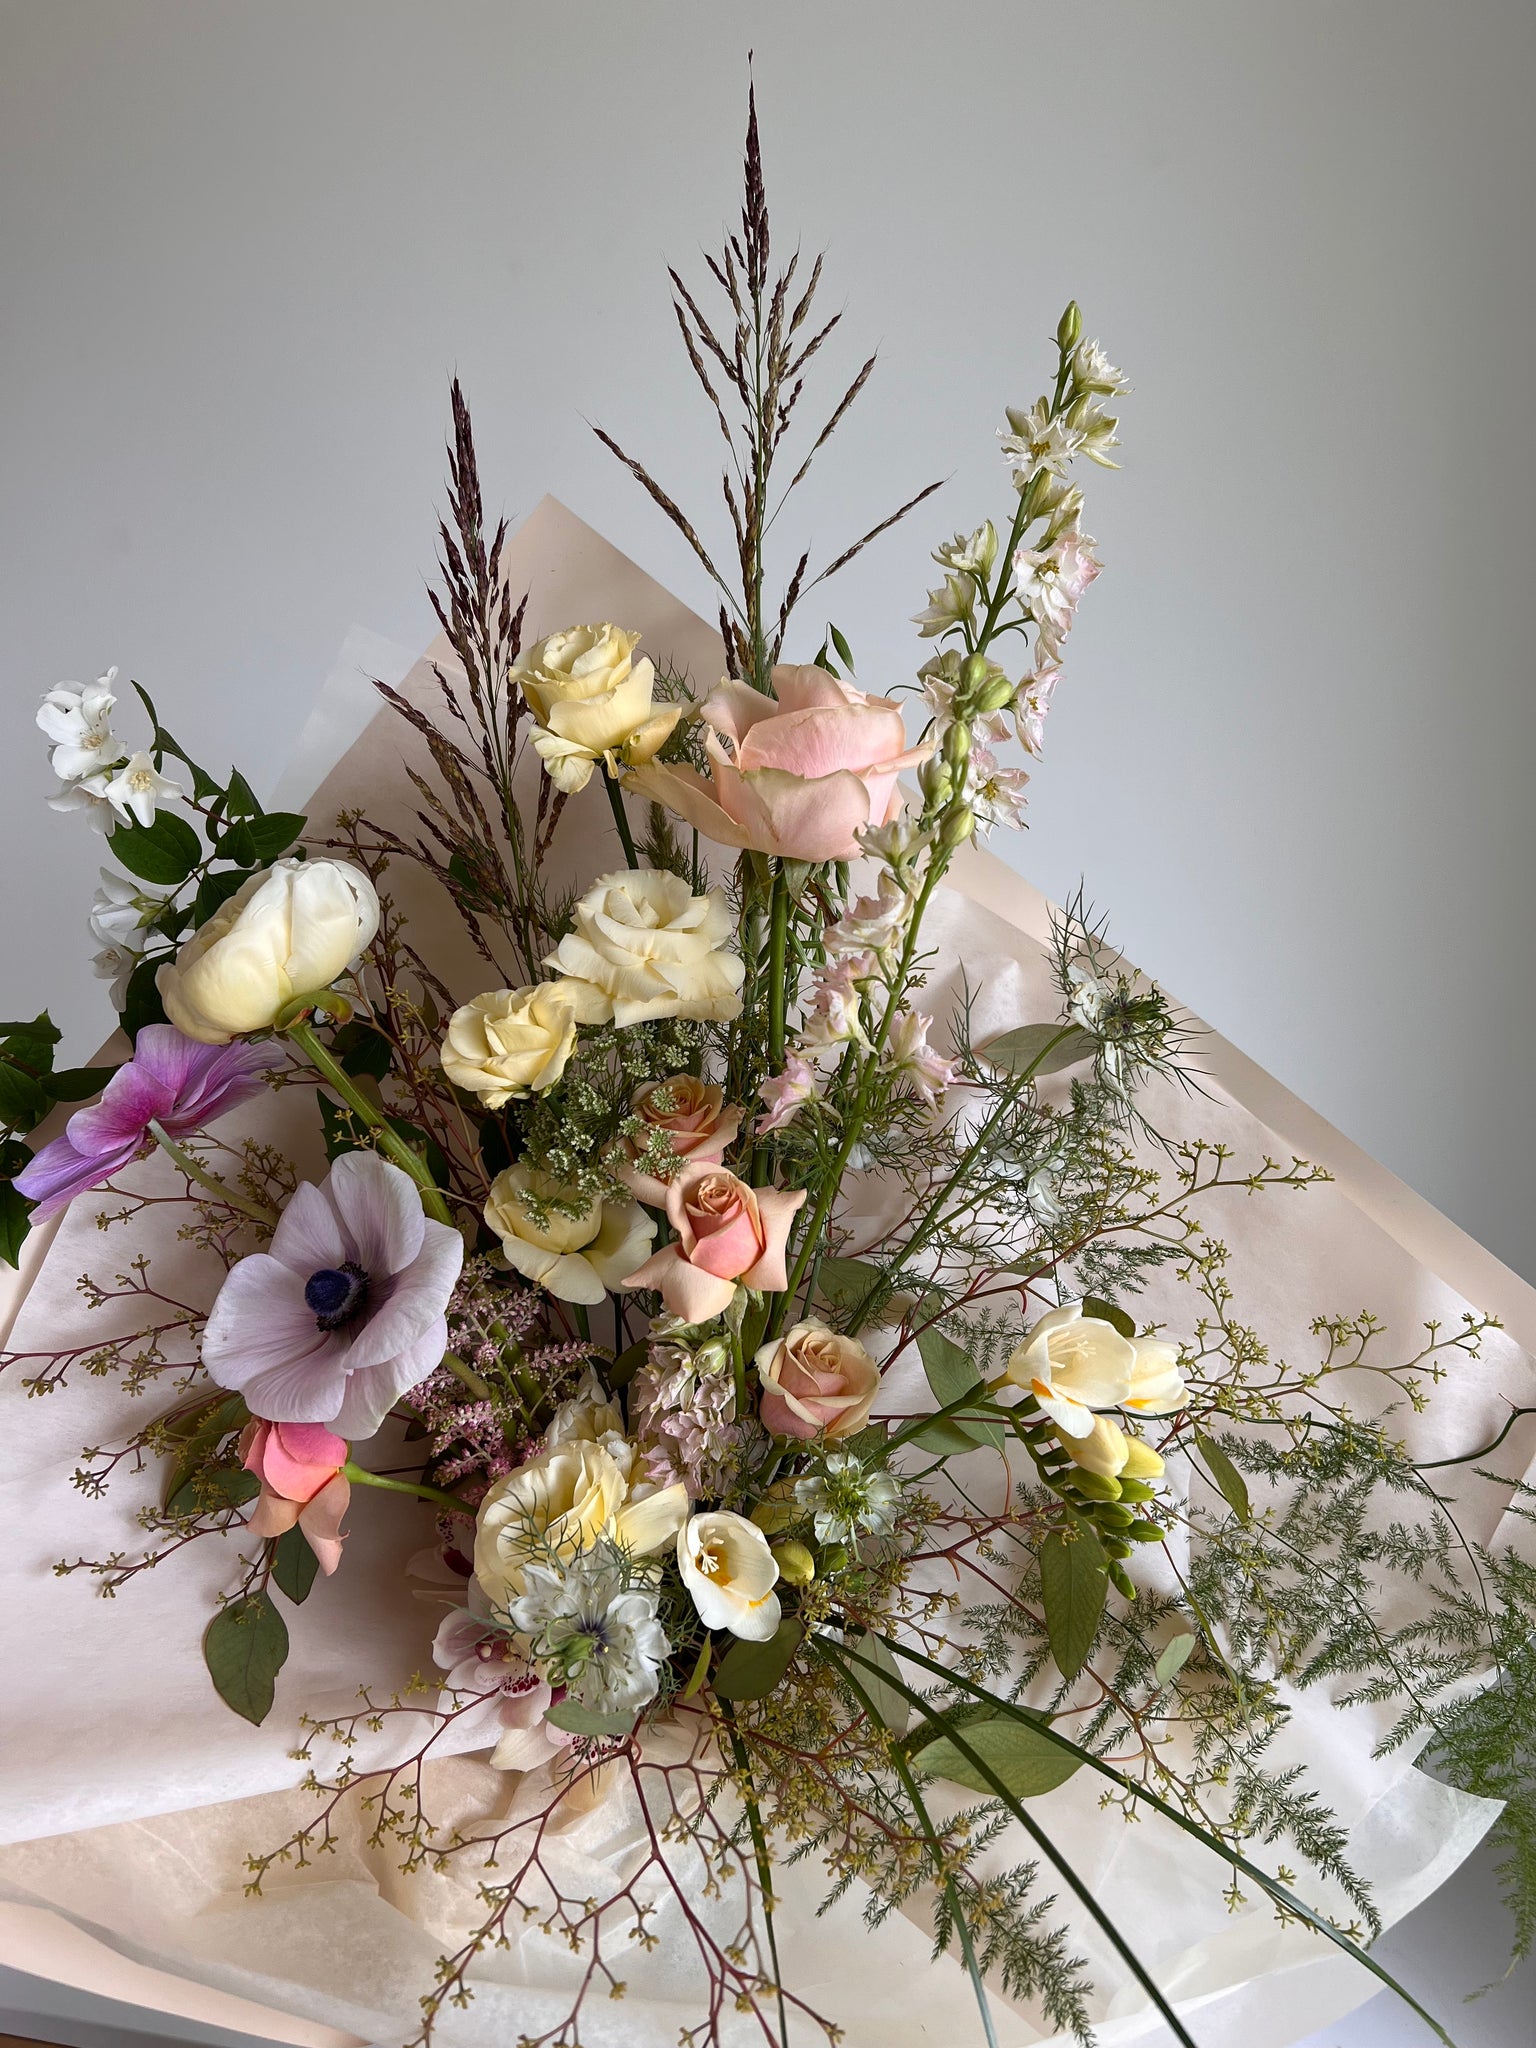 large hand tied bouquet is designed with statement flowers including local roses, peonies, anemone, and orchids or whatever is best in season